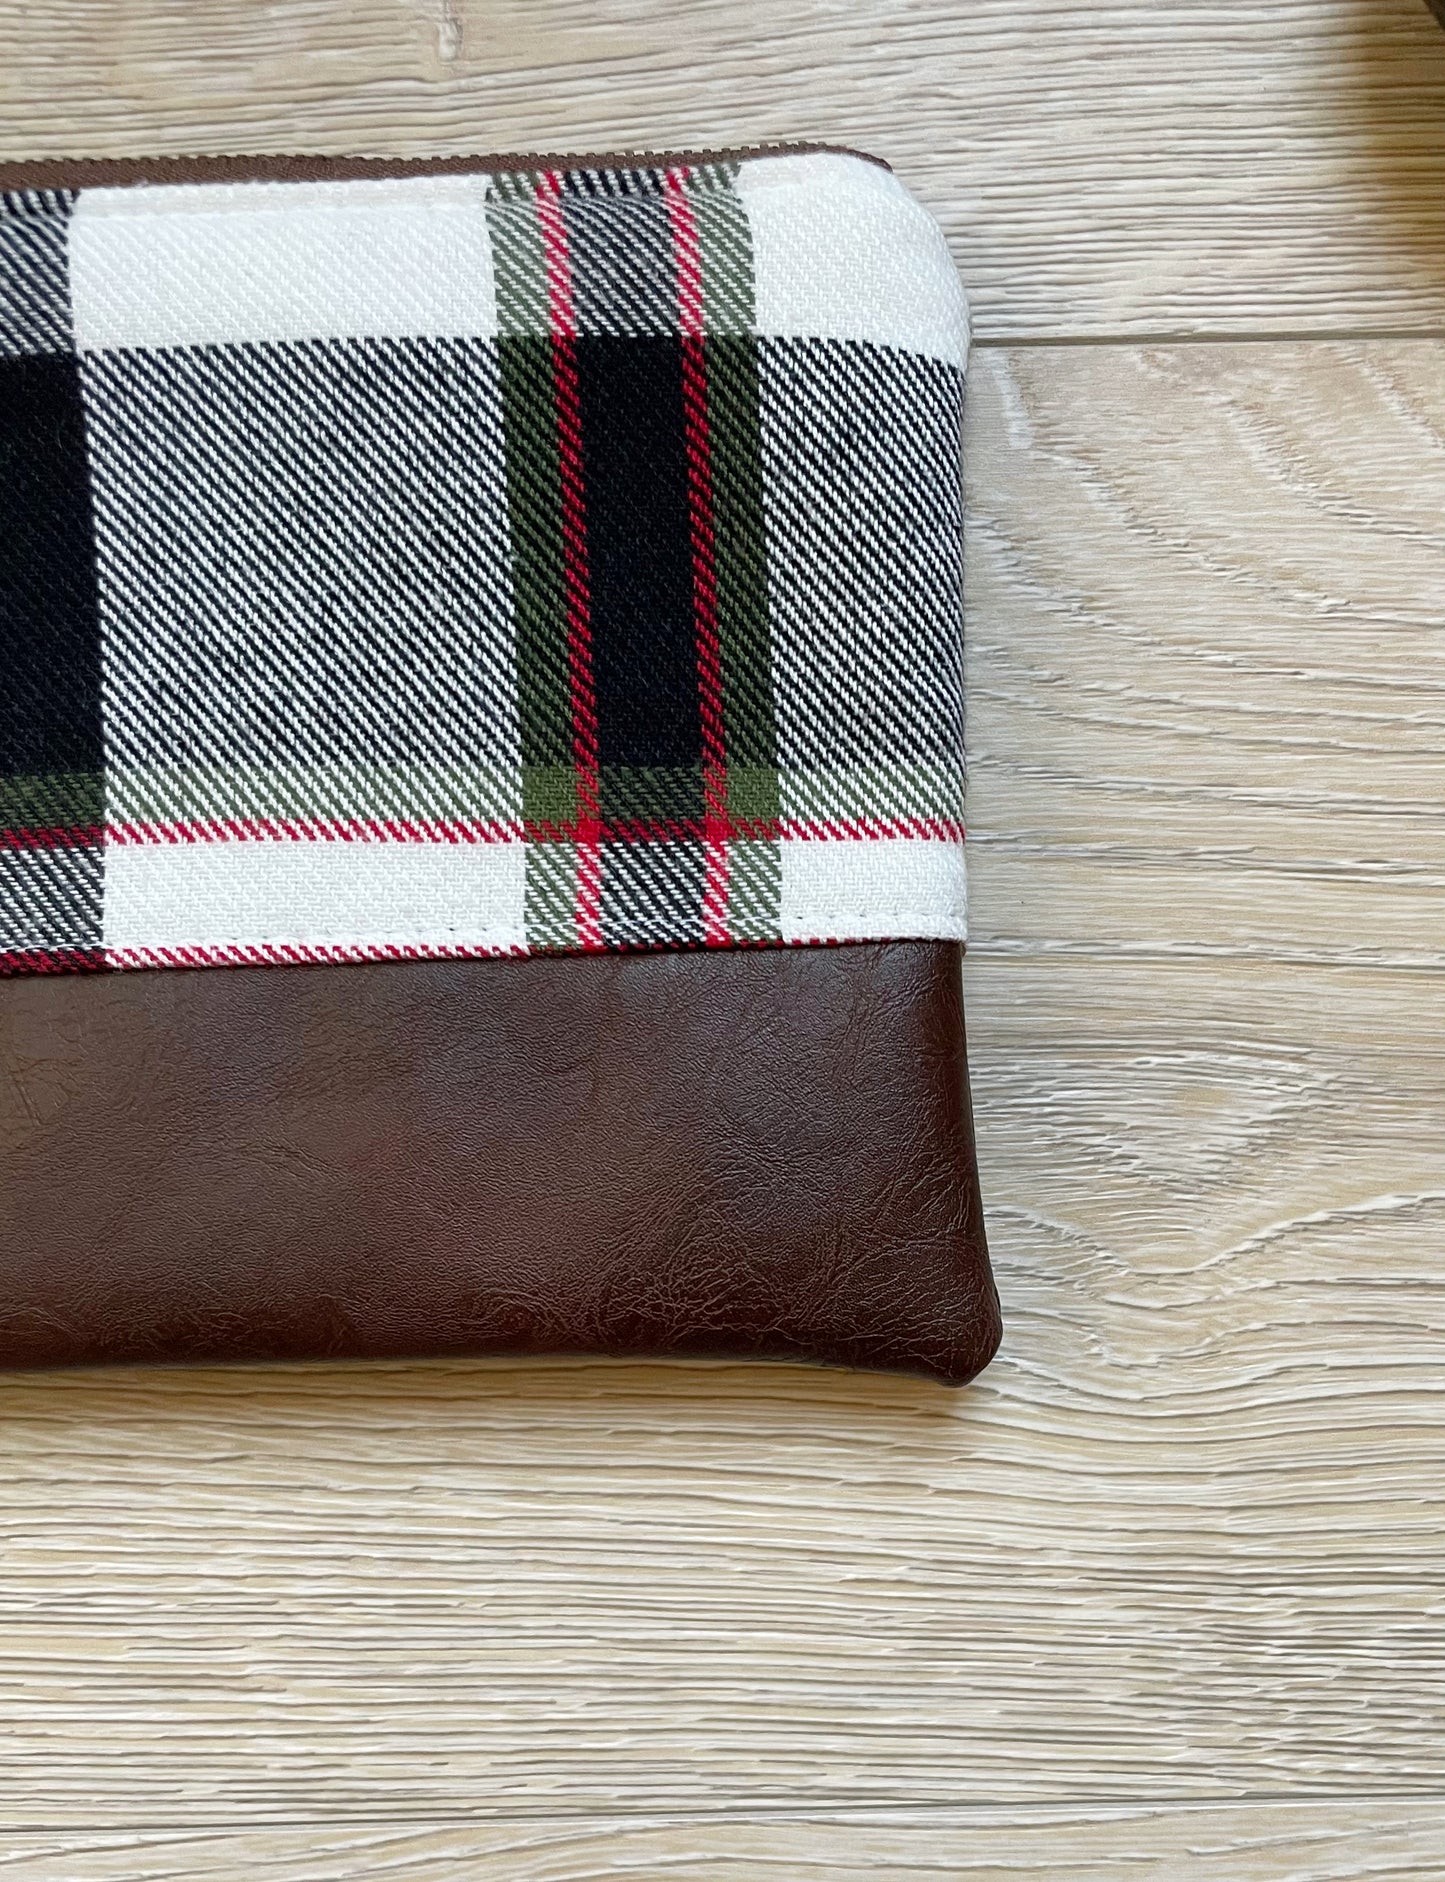 Black, red, green and cream plaid flannel wristlet